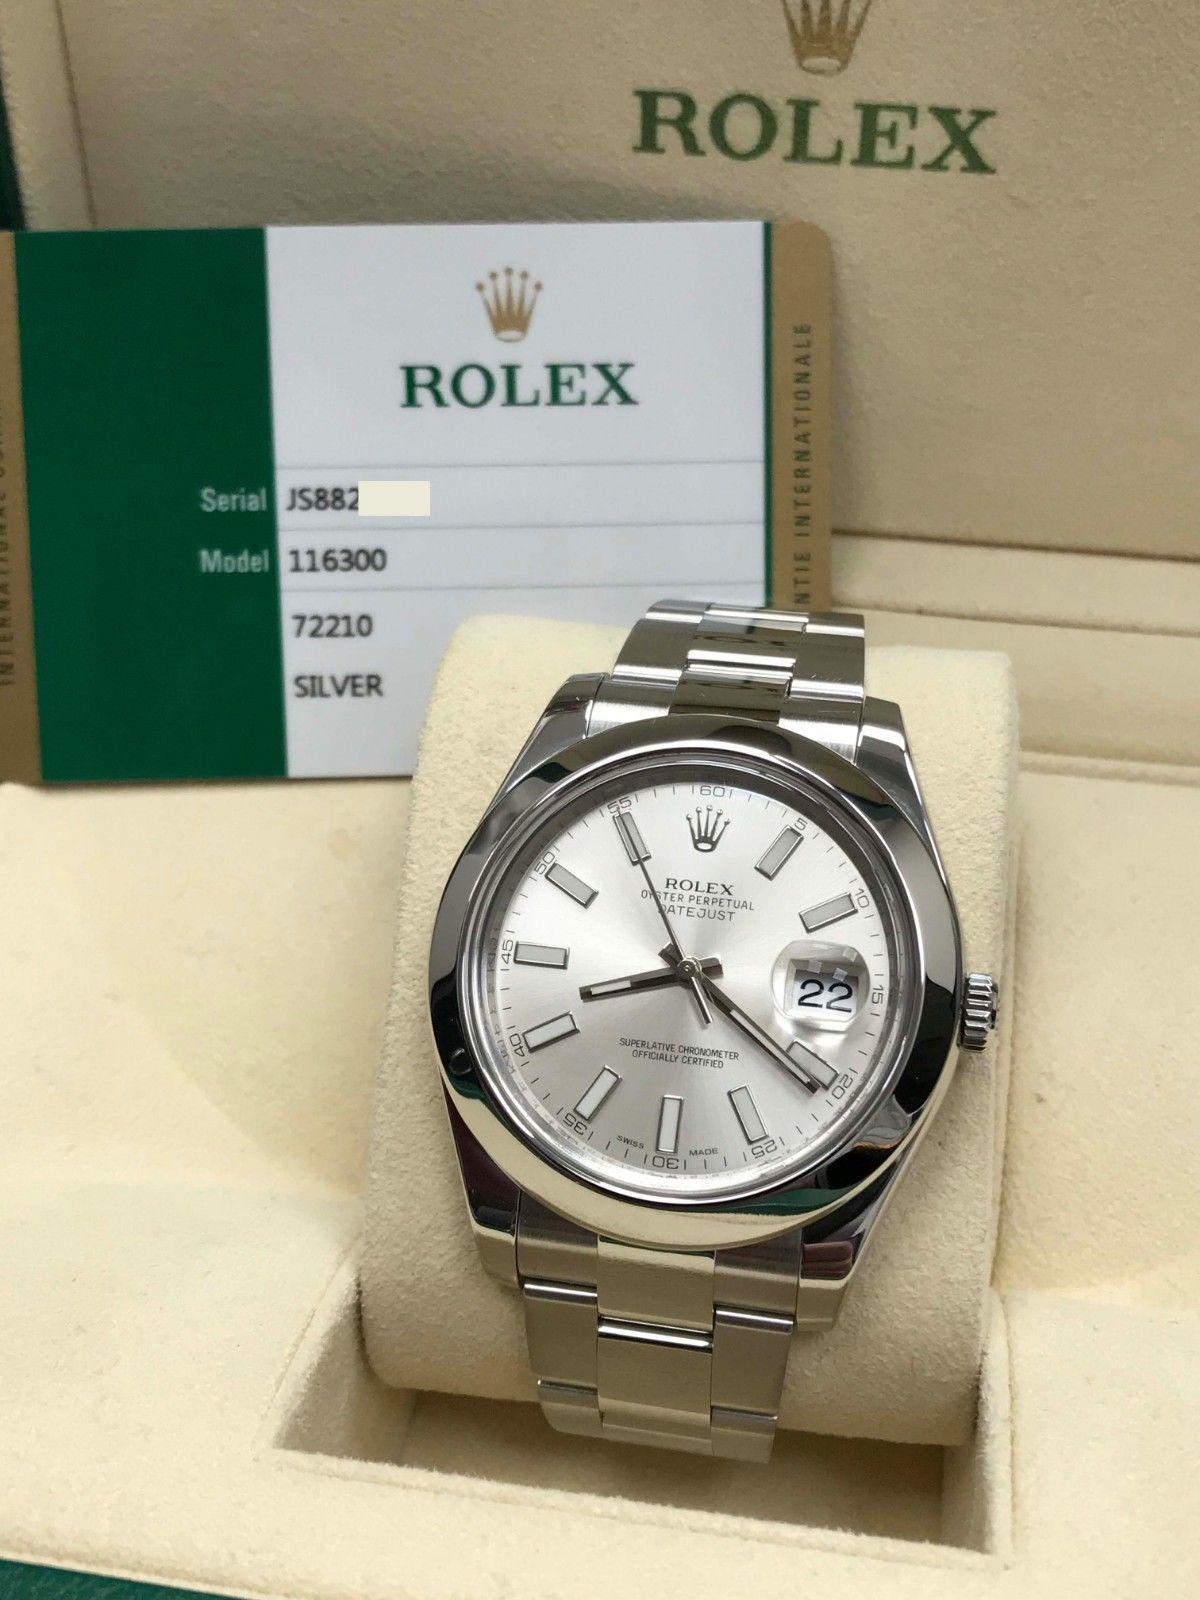 Style Number: 116300 

 

Serial: JS88***

 

Year: 2017

 

Model: Datejust II

 

Case Material: Stainless Steel

 

Band: Stainless Steel

 

Bezel: Stainless Steel

 

Dial: Stainless Steel

 

Face: Sapphire Crystal 

 

Case Size: 41mm

